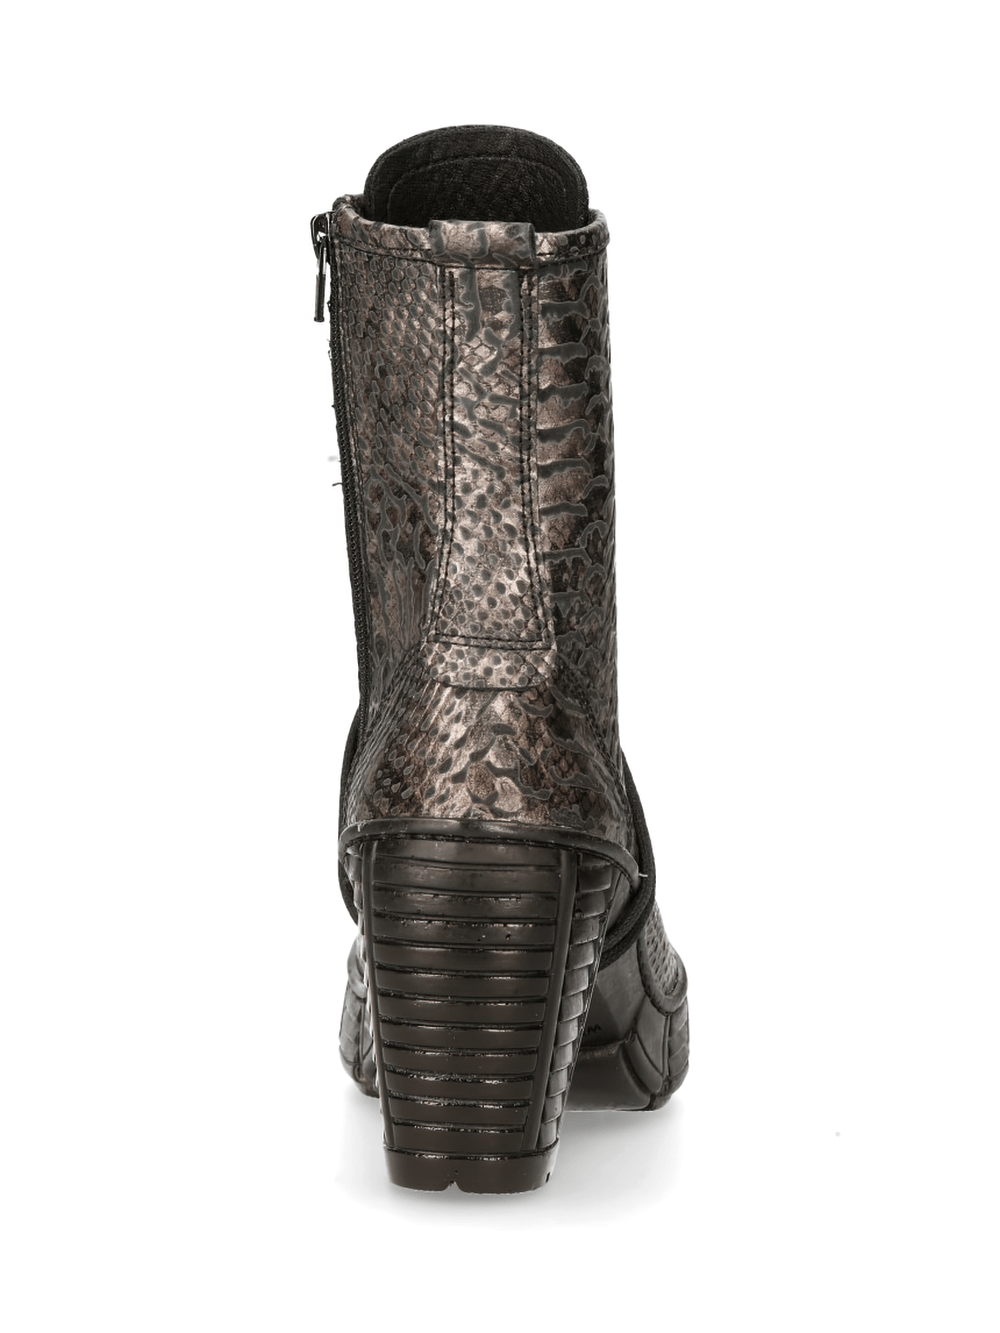 NEW ROCK Metallic Snake Print Lace-Up Ankle Boots